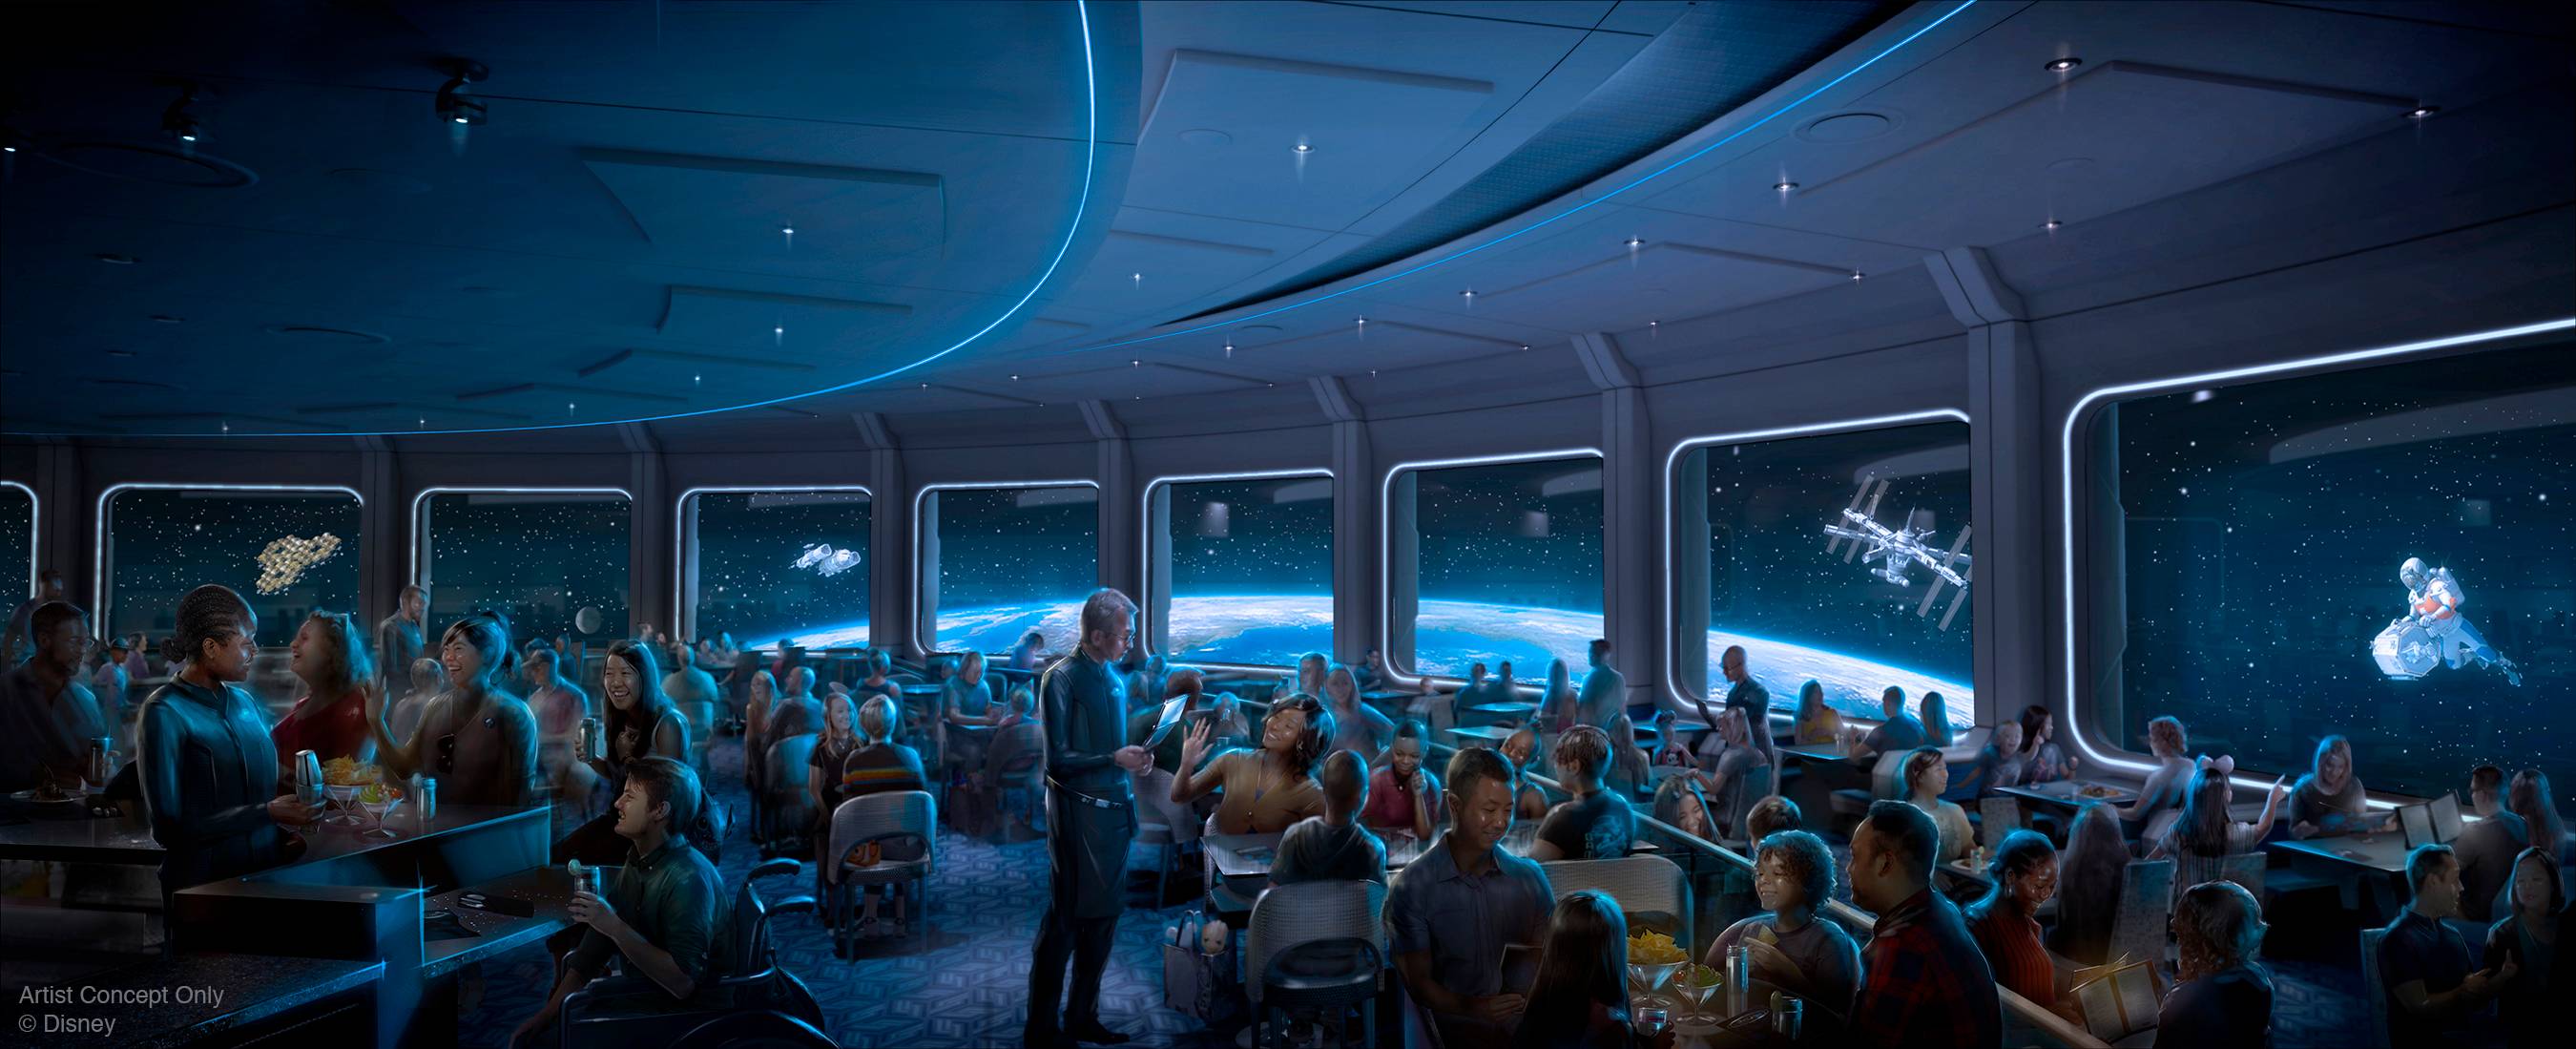 PHOTO - New rendering shows the space elevator that will take you high above the Earth at Space 220